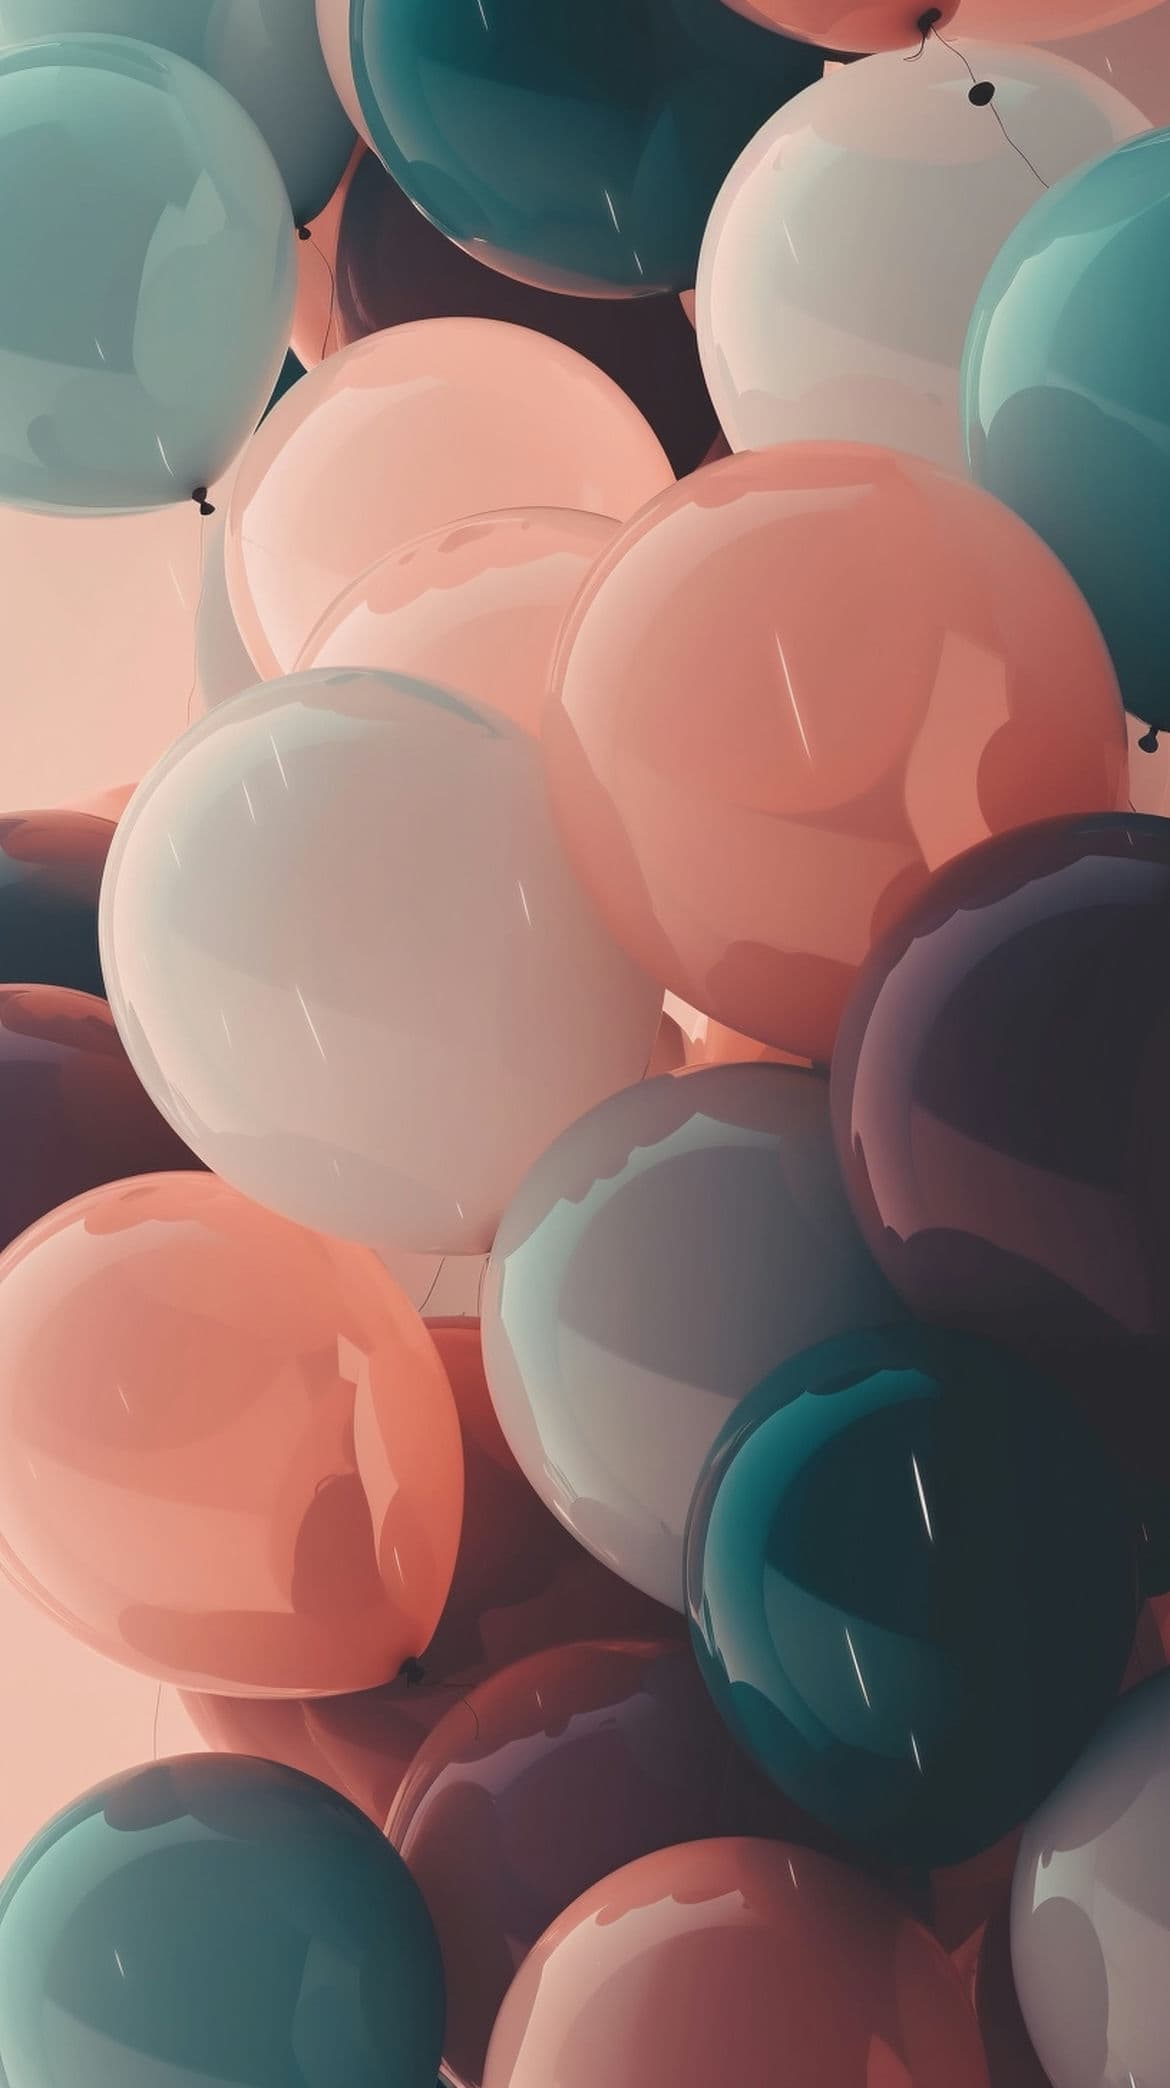 IPhone wallpaper with colorful balloons. - Balloons